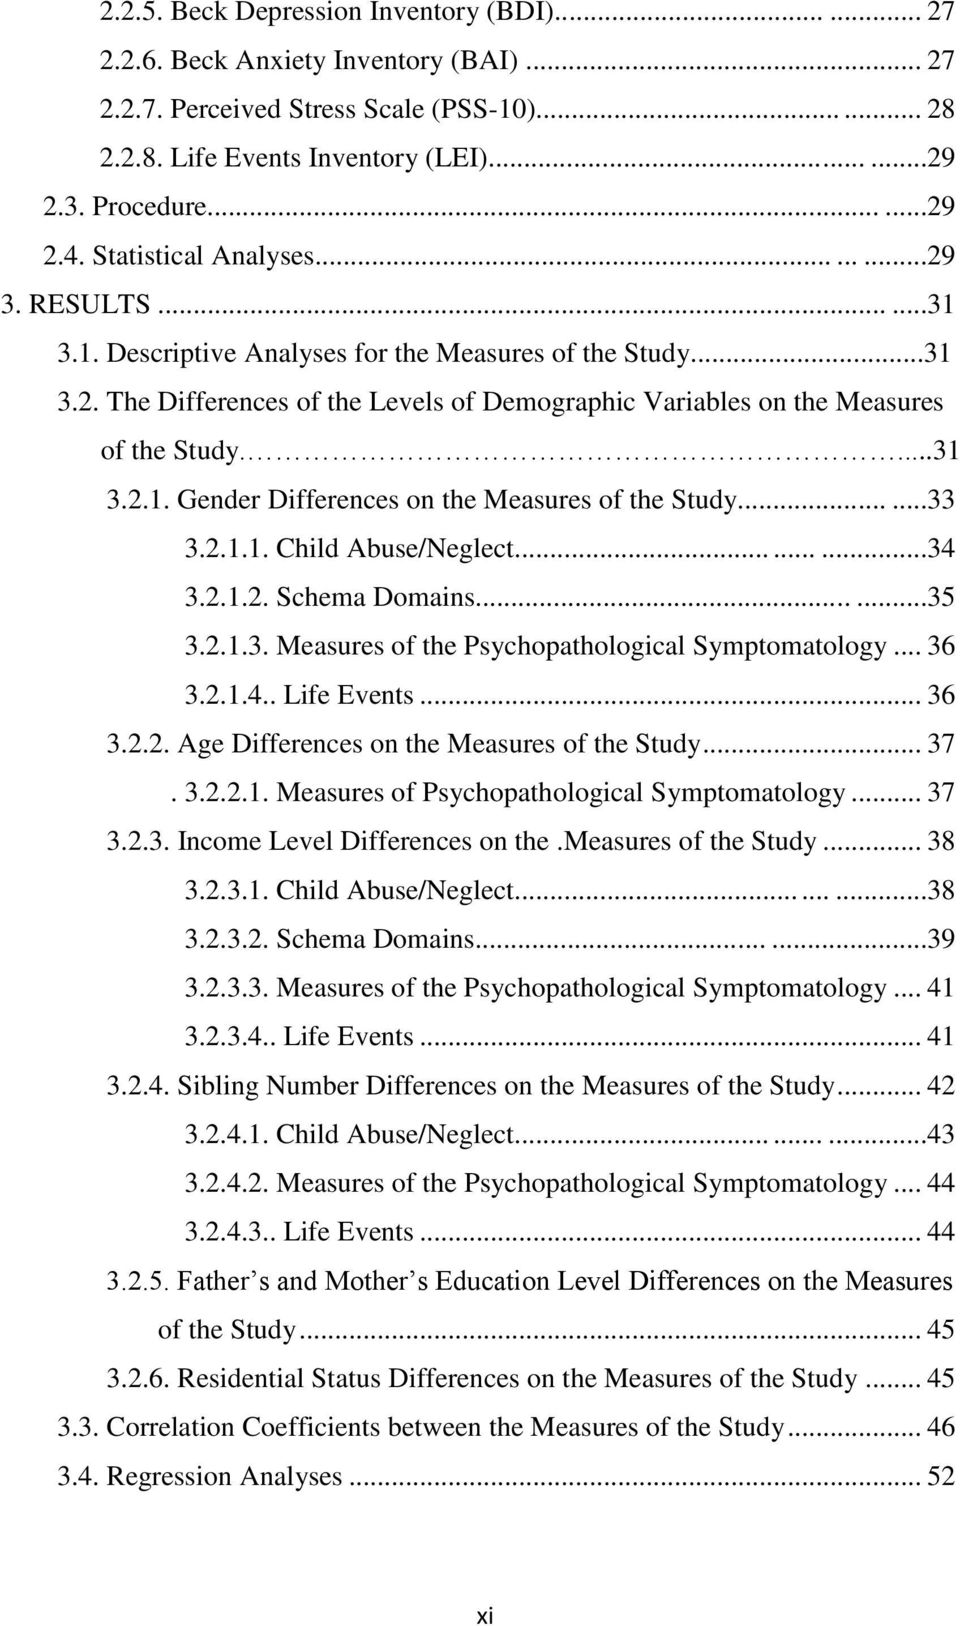 ...31 3.2.1. Gender Differences on the Measures of the Study......33 3.2.1.1. Child Abuse/Neglect.........34 3.2.1.2. Schema Domains........35 3.2.1.3. Measures of the Psychopathological Symptomatology.